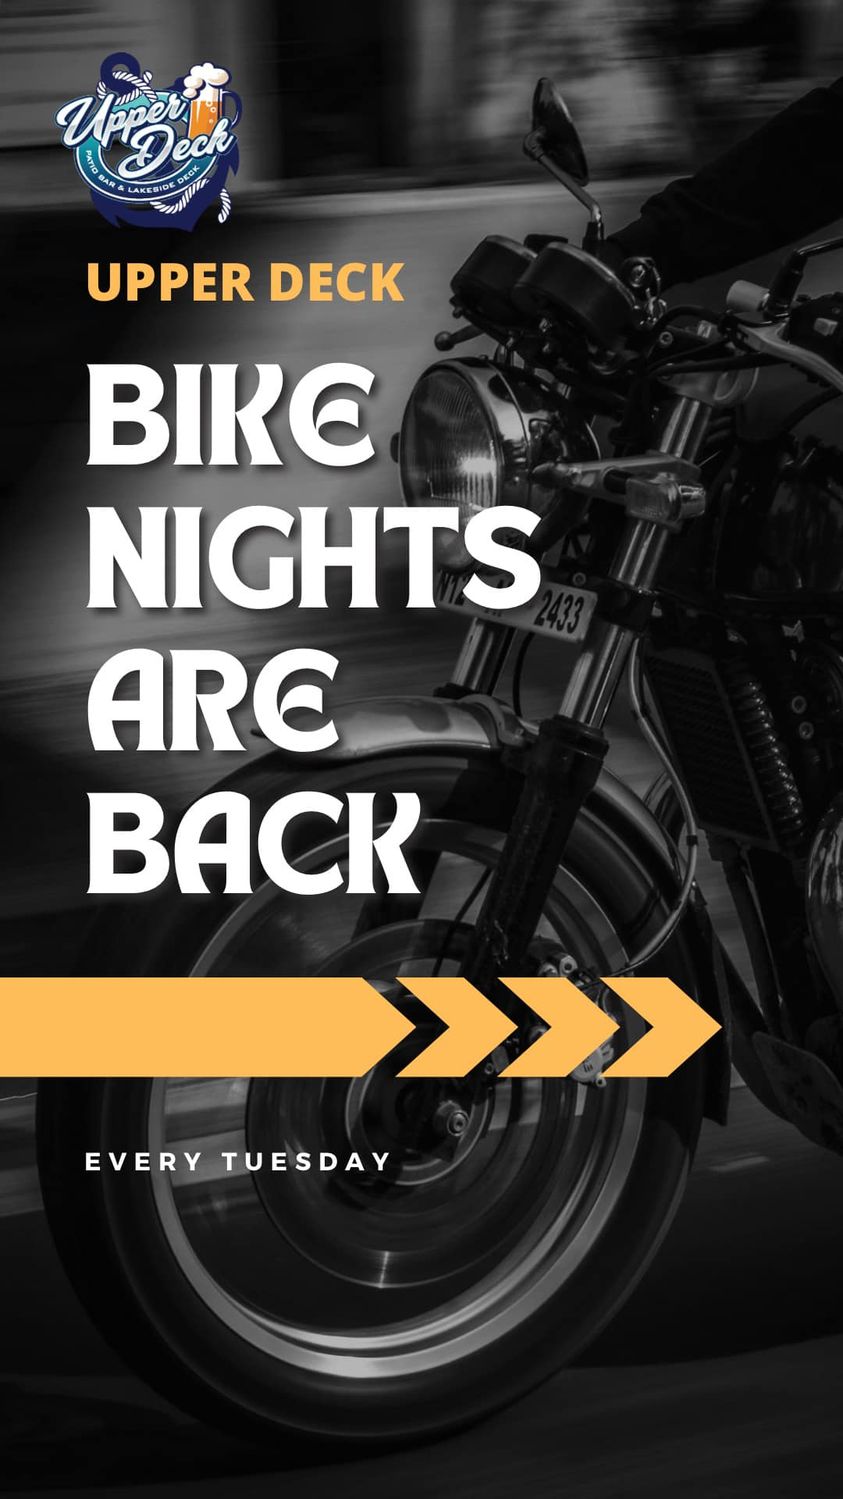 You are currently viewing Tuesday Bike Nights Are Back!